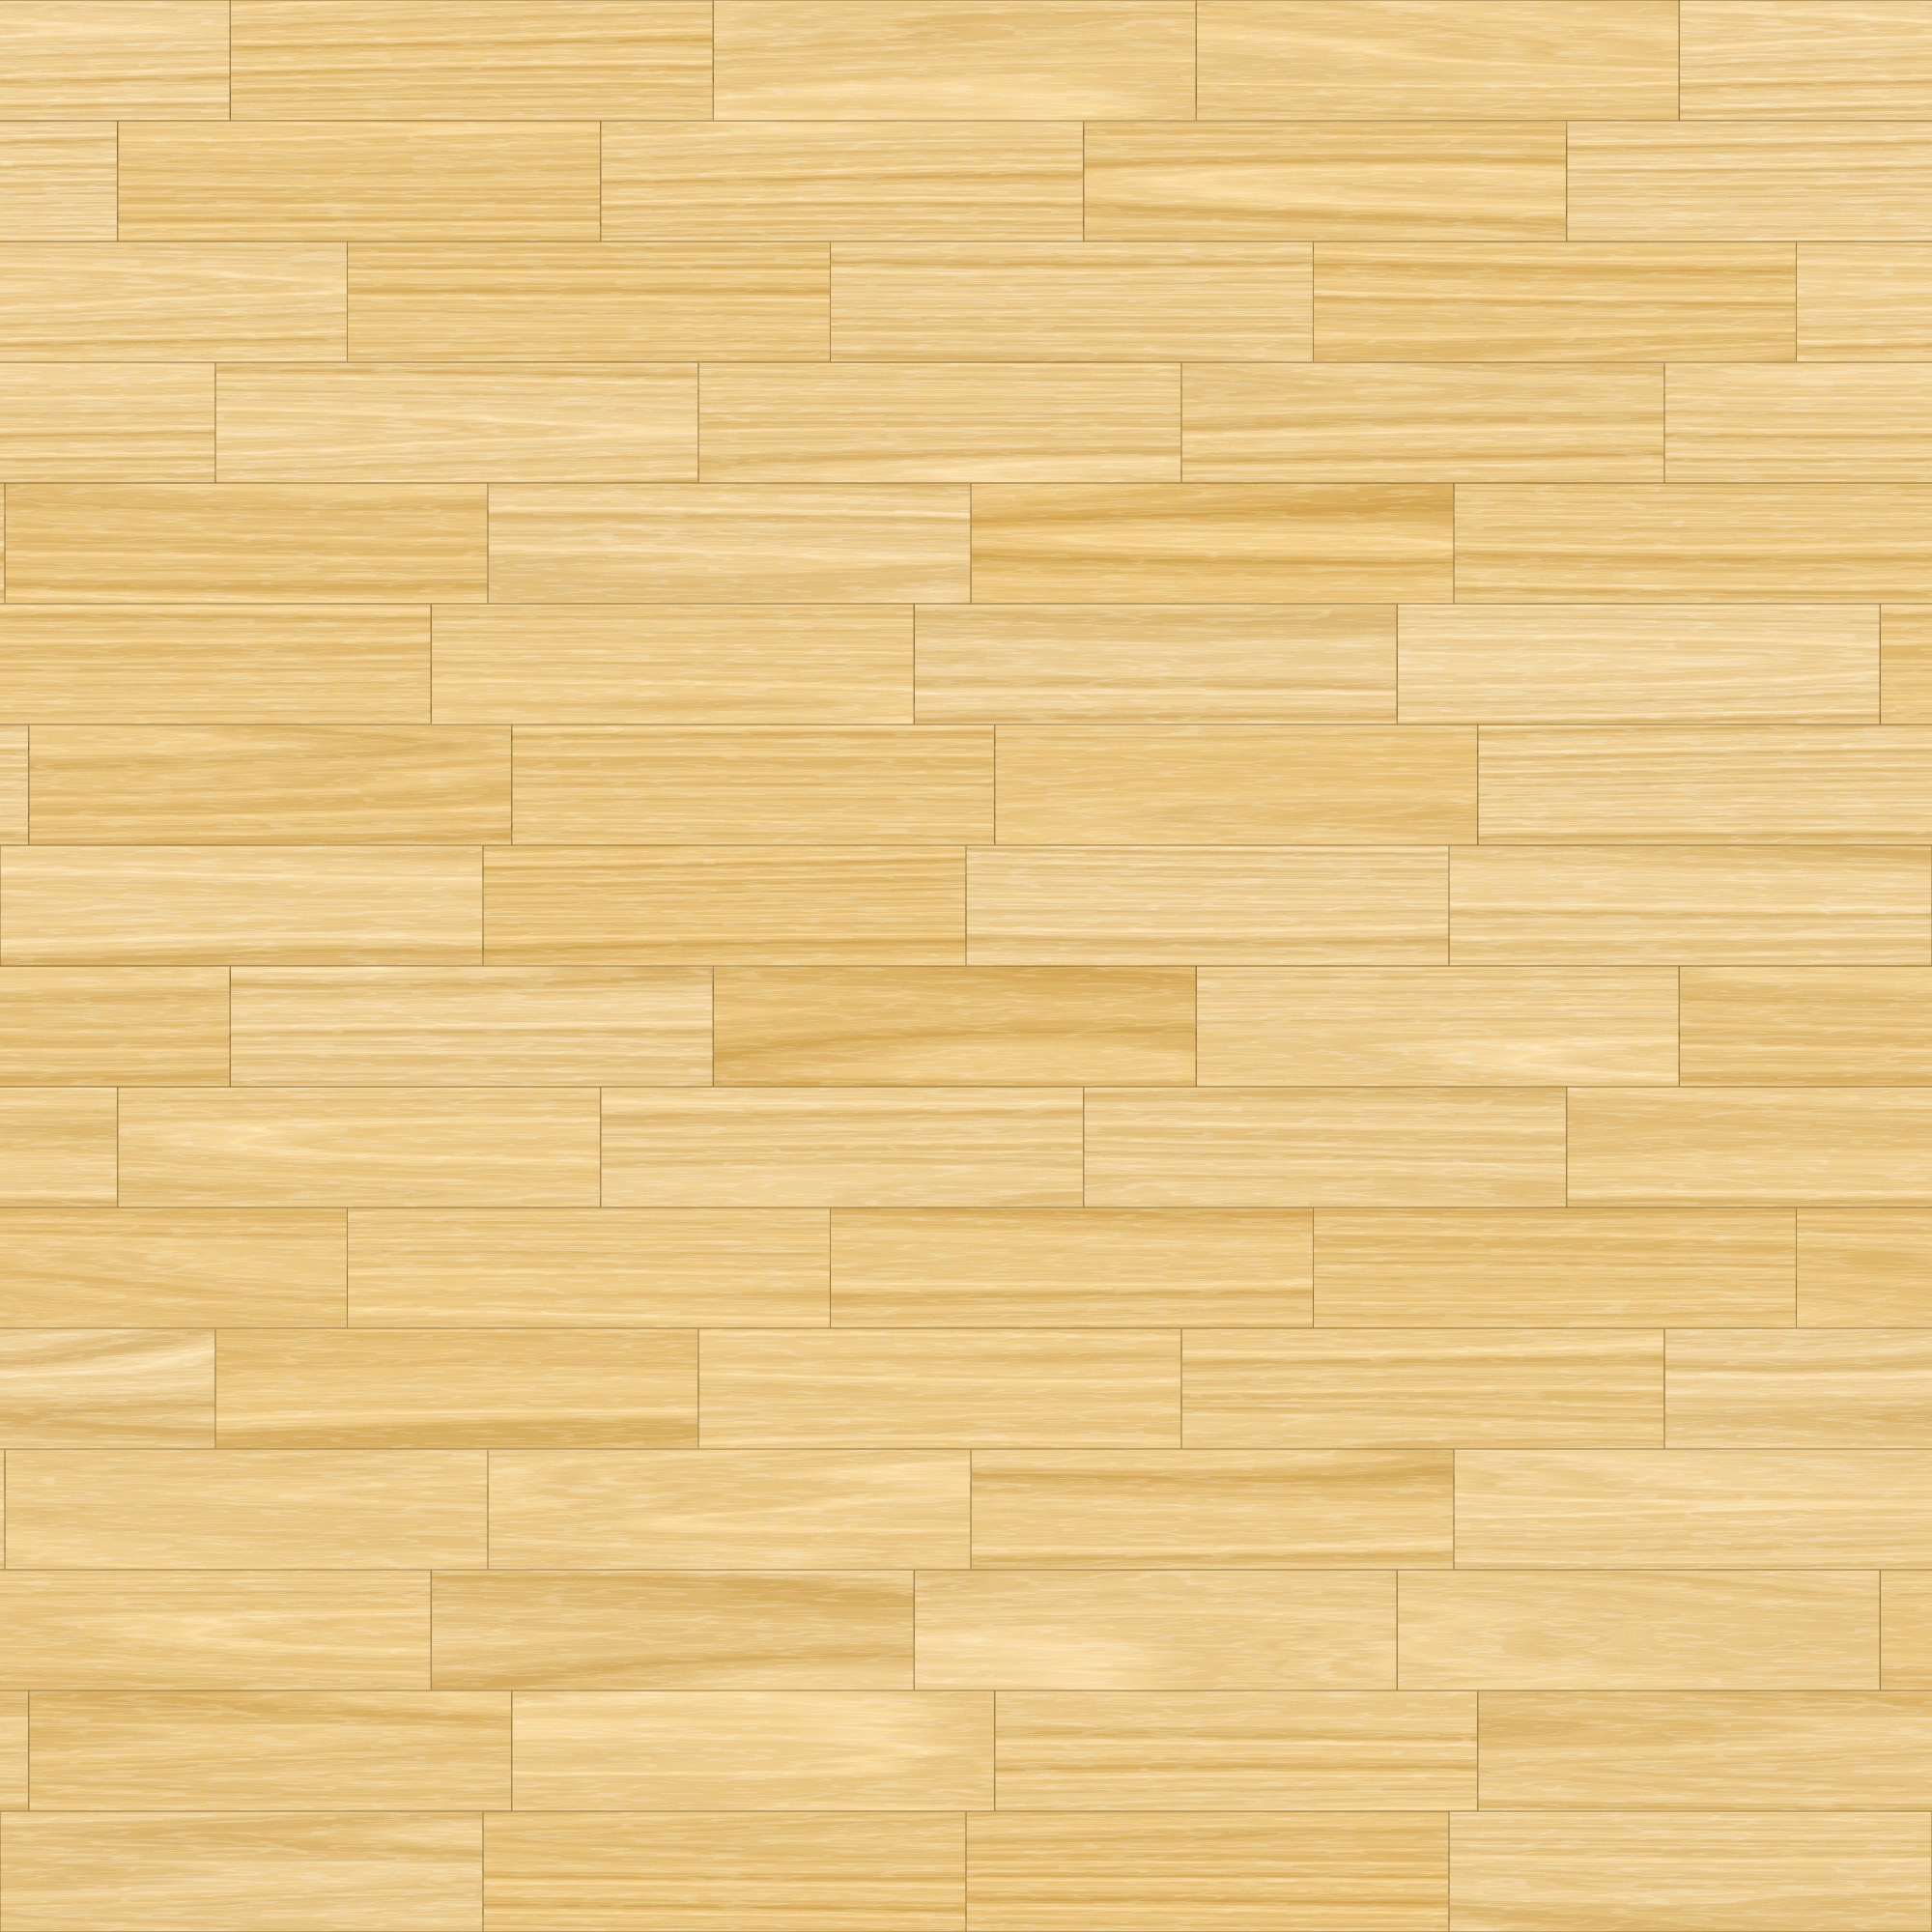 oak texture in a seamless wood background | www.myfreetextures.com